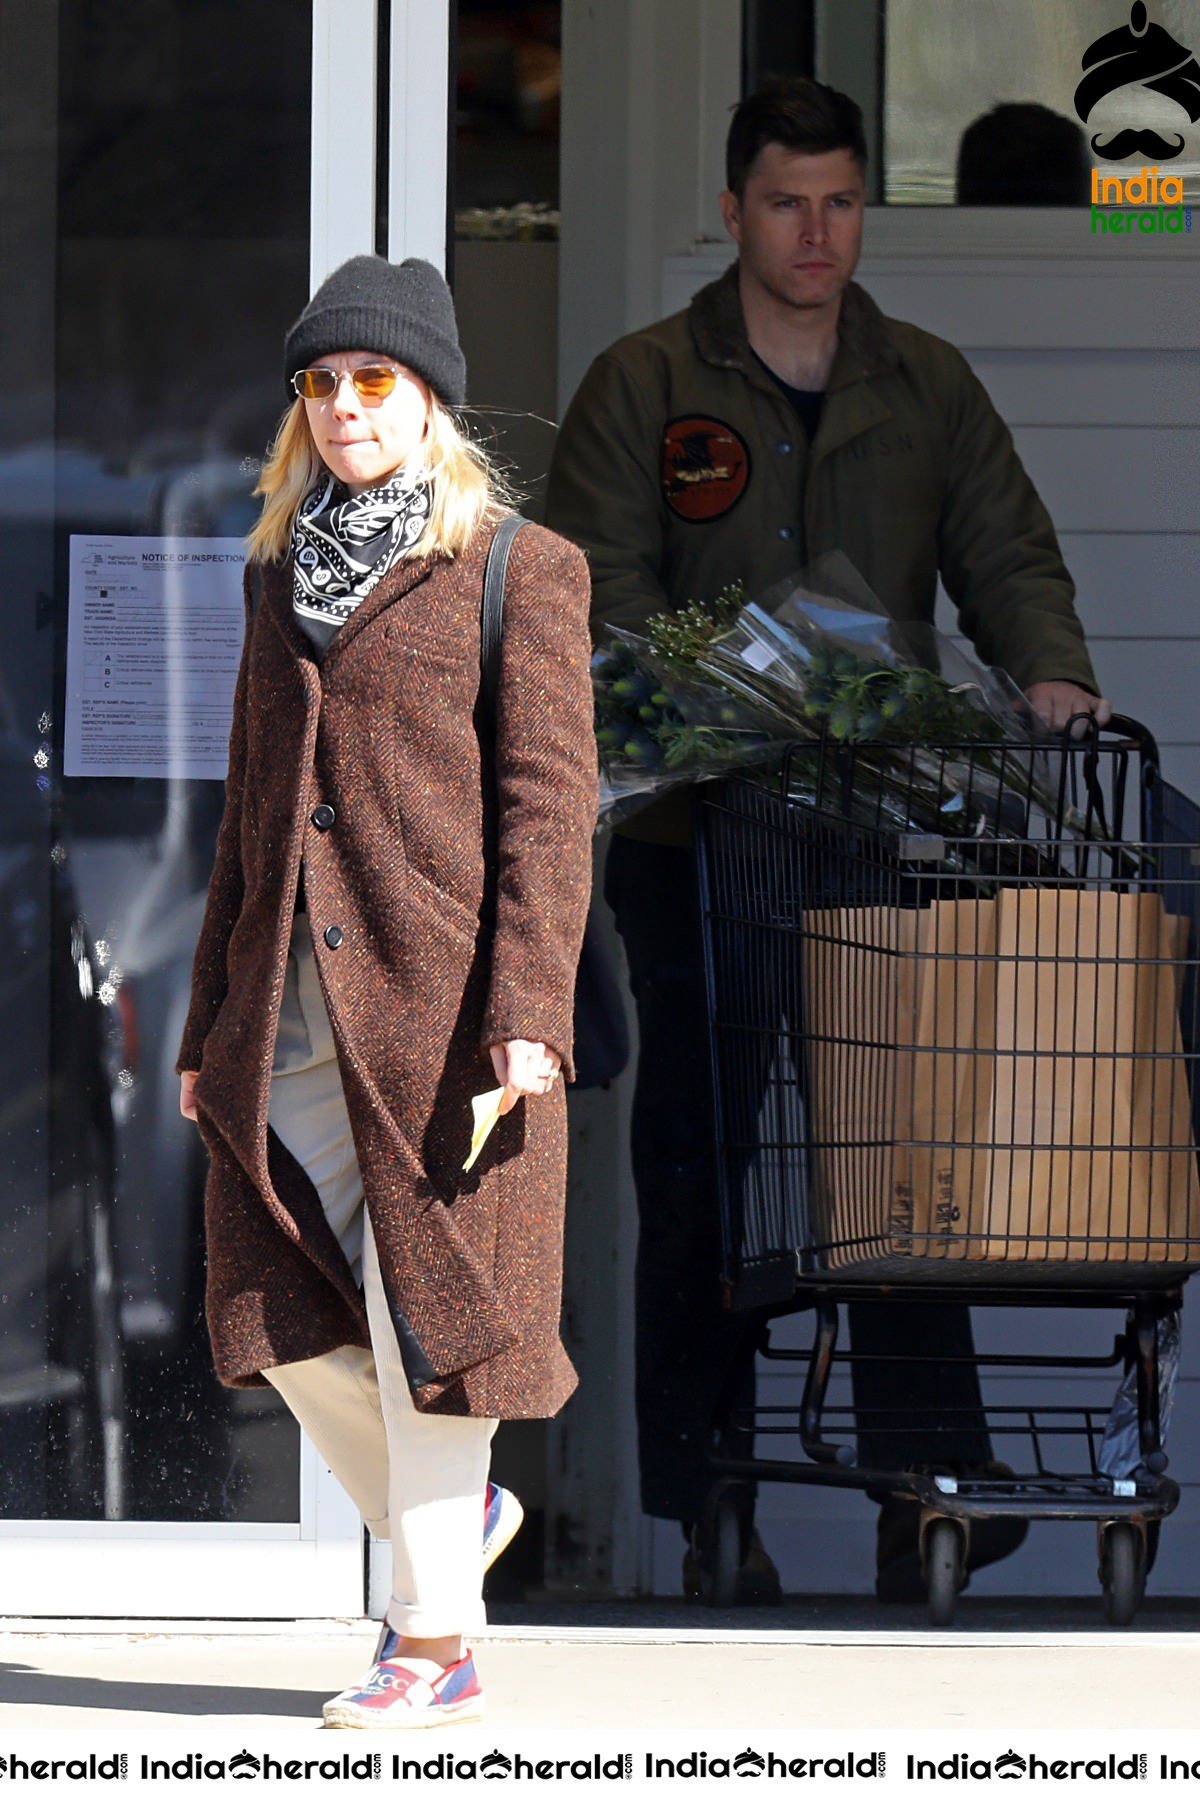 Scarlett Johansson caught by Paparazzi as she does grocery shopping in the Hamptons